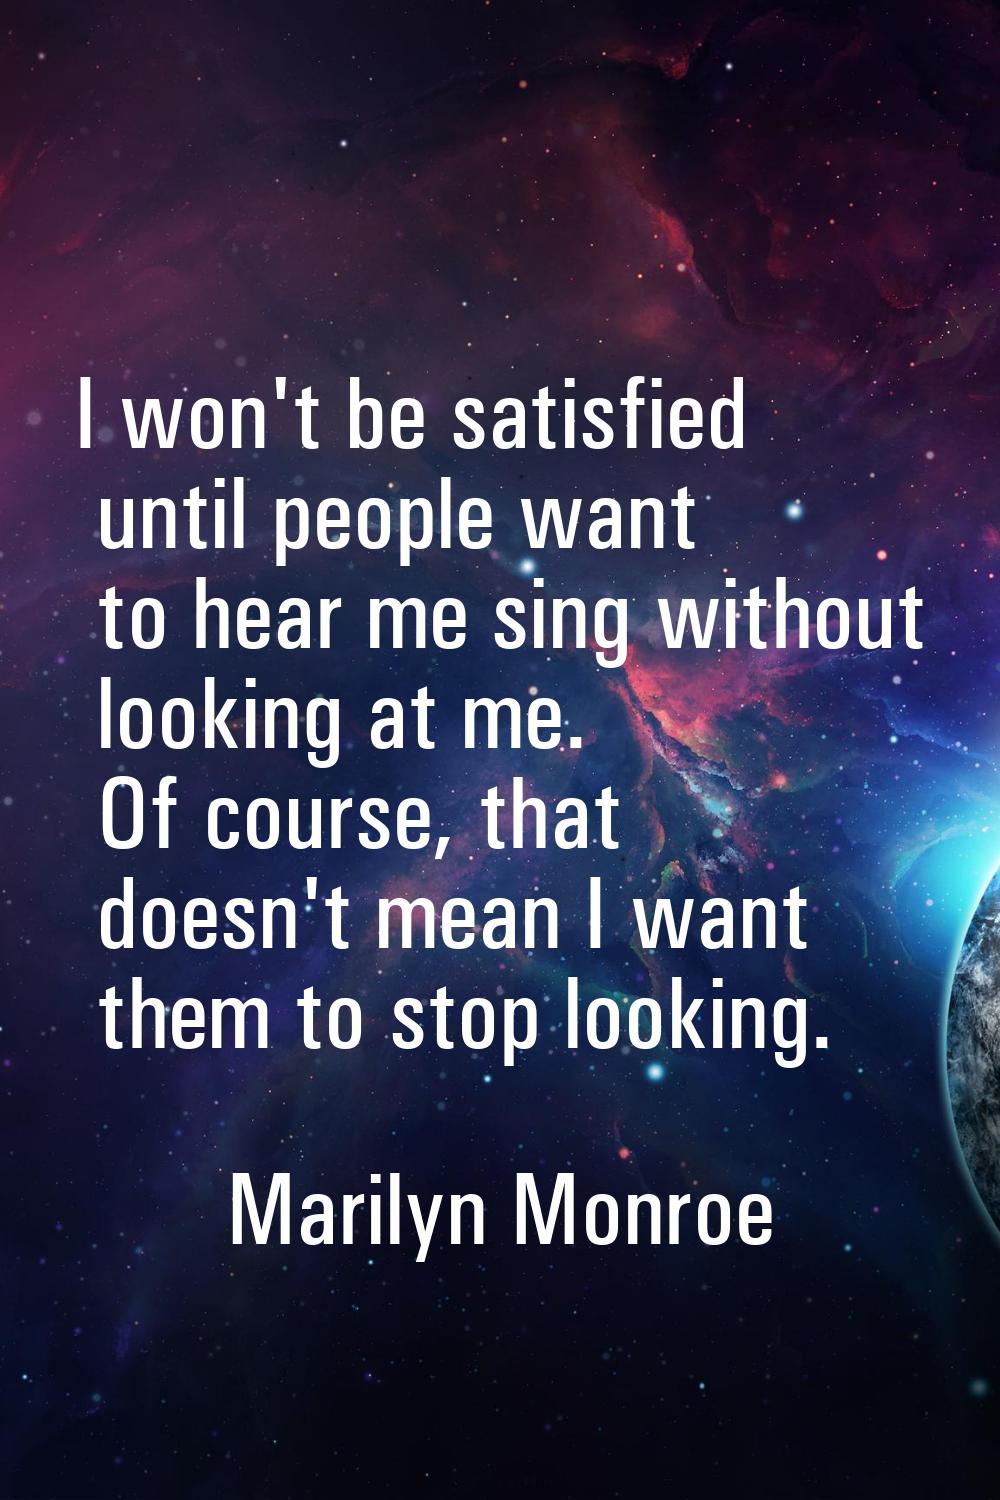 I won't be satisfied until people want to hear me sing without looking at me. Of course, that doesn